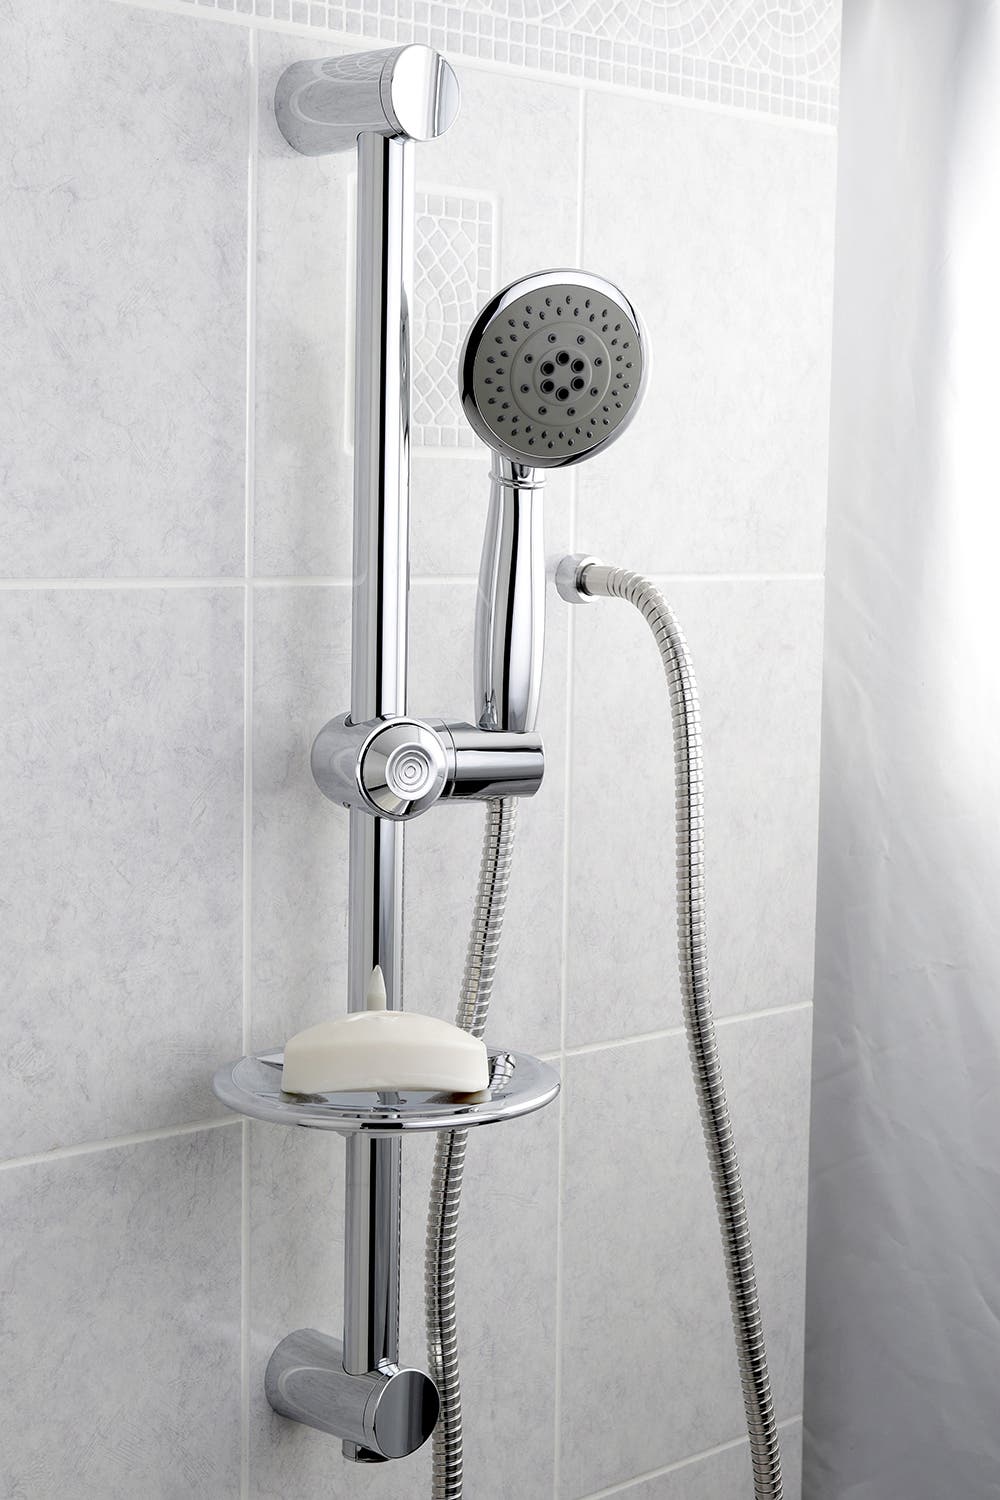 Wash the Day Away with the Vilbosch Hand Shower, KX2522SBB